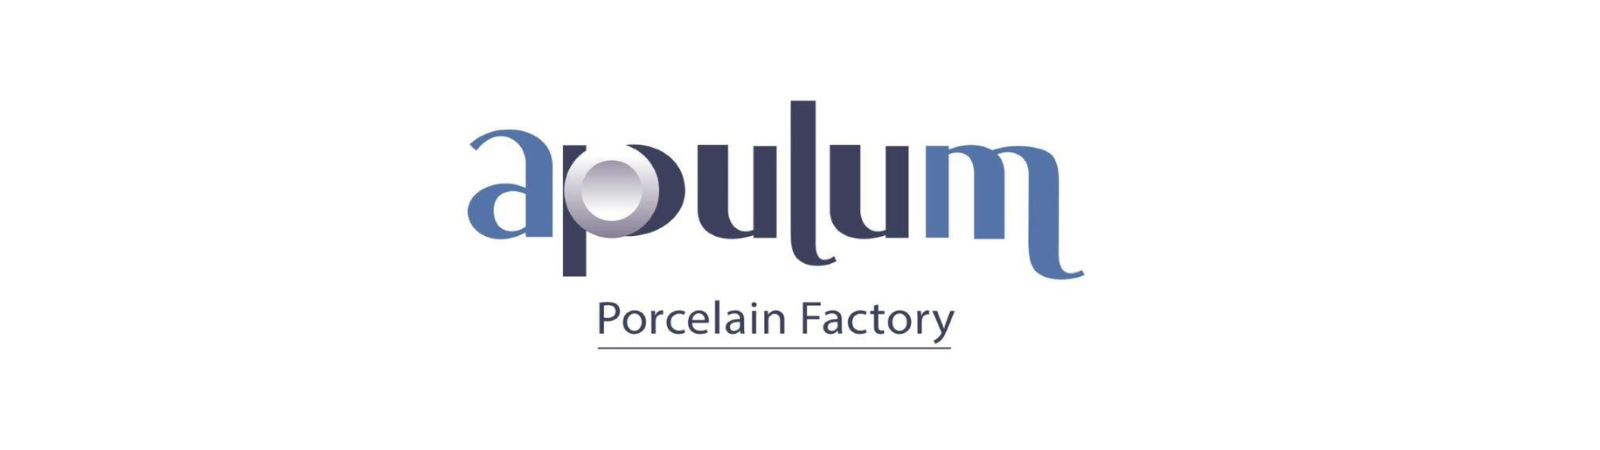 Apulum accepts the challenge of the circular economy thanks to SACMI technology